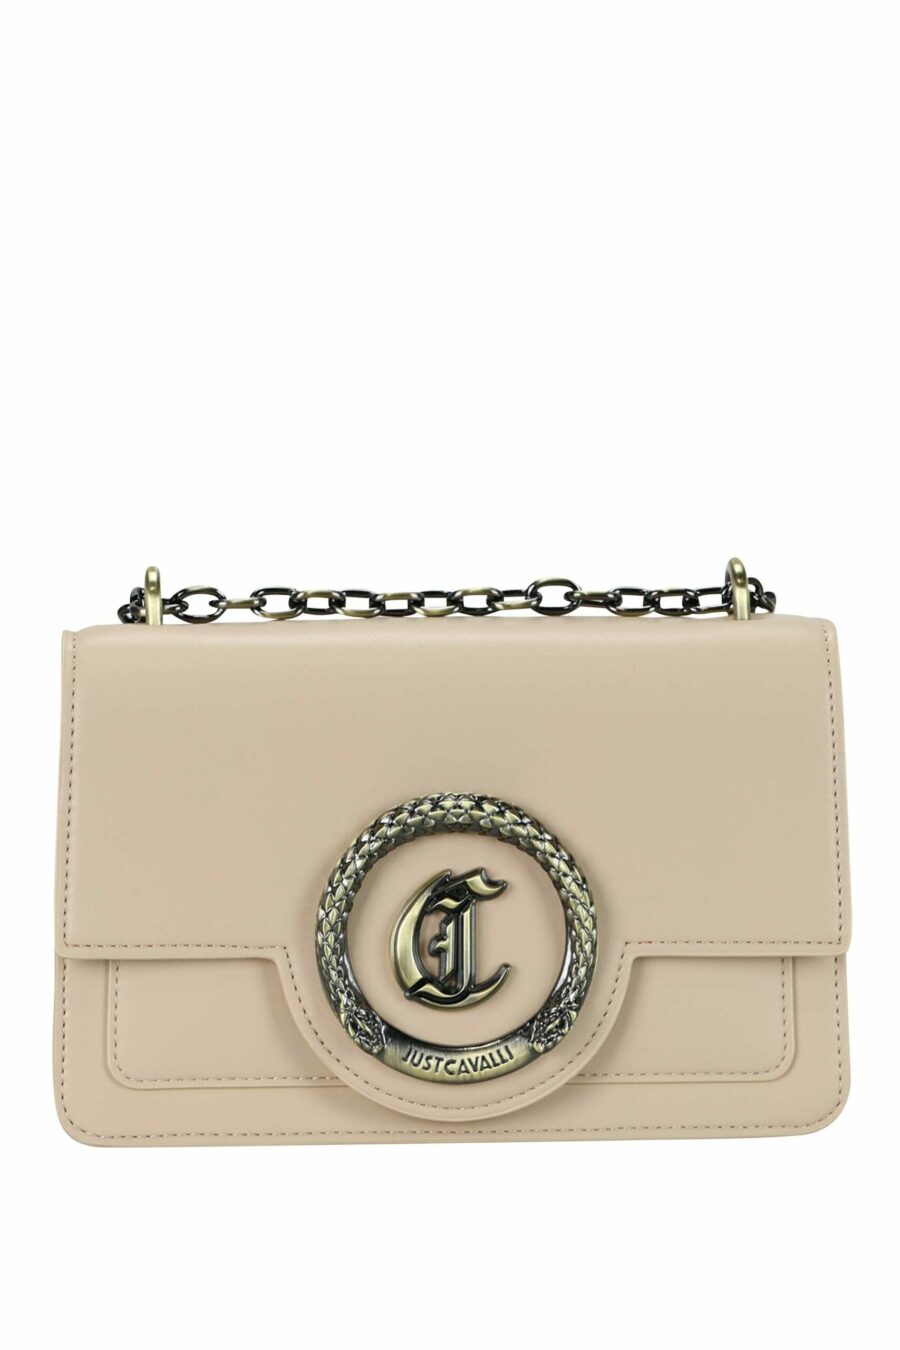 Square beige shoulder bag with chain and golden circular "c" logo - 8052672735591 scaled